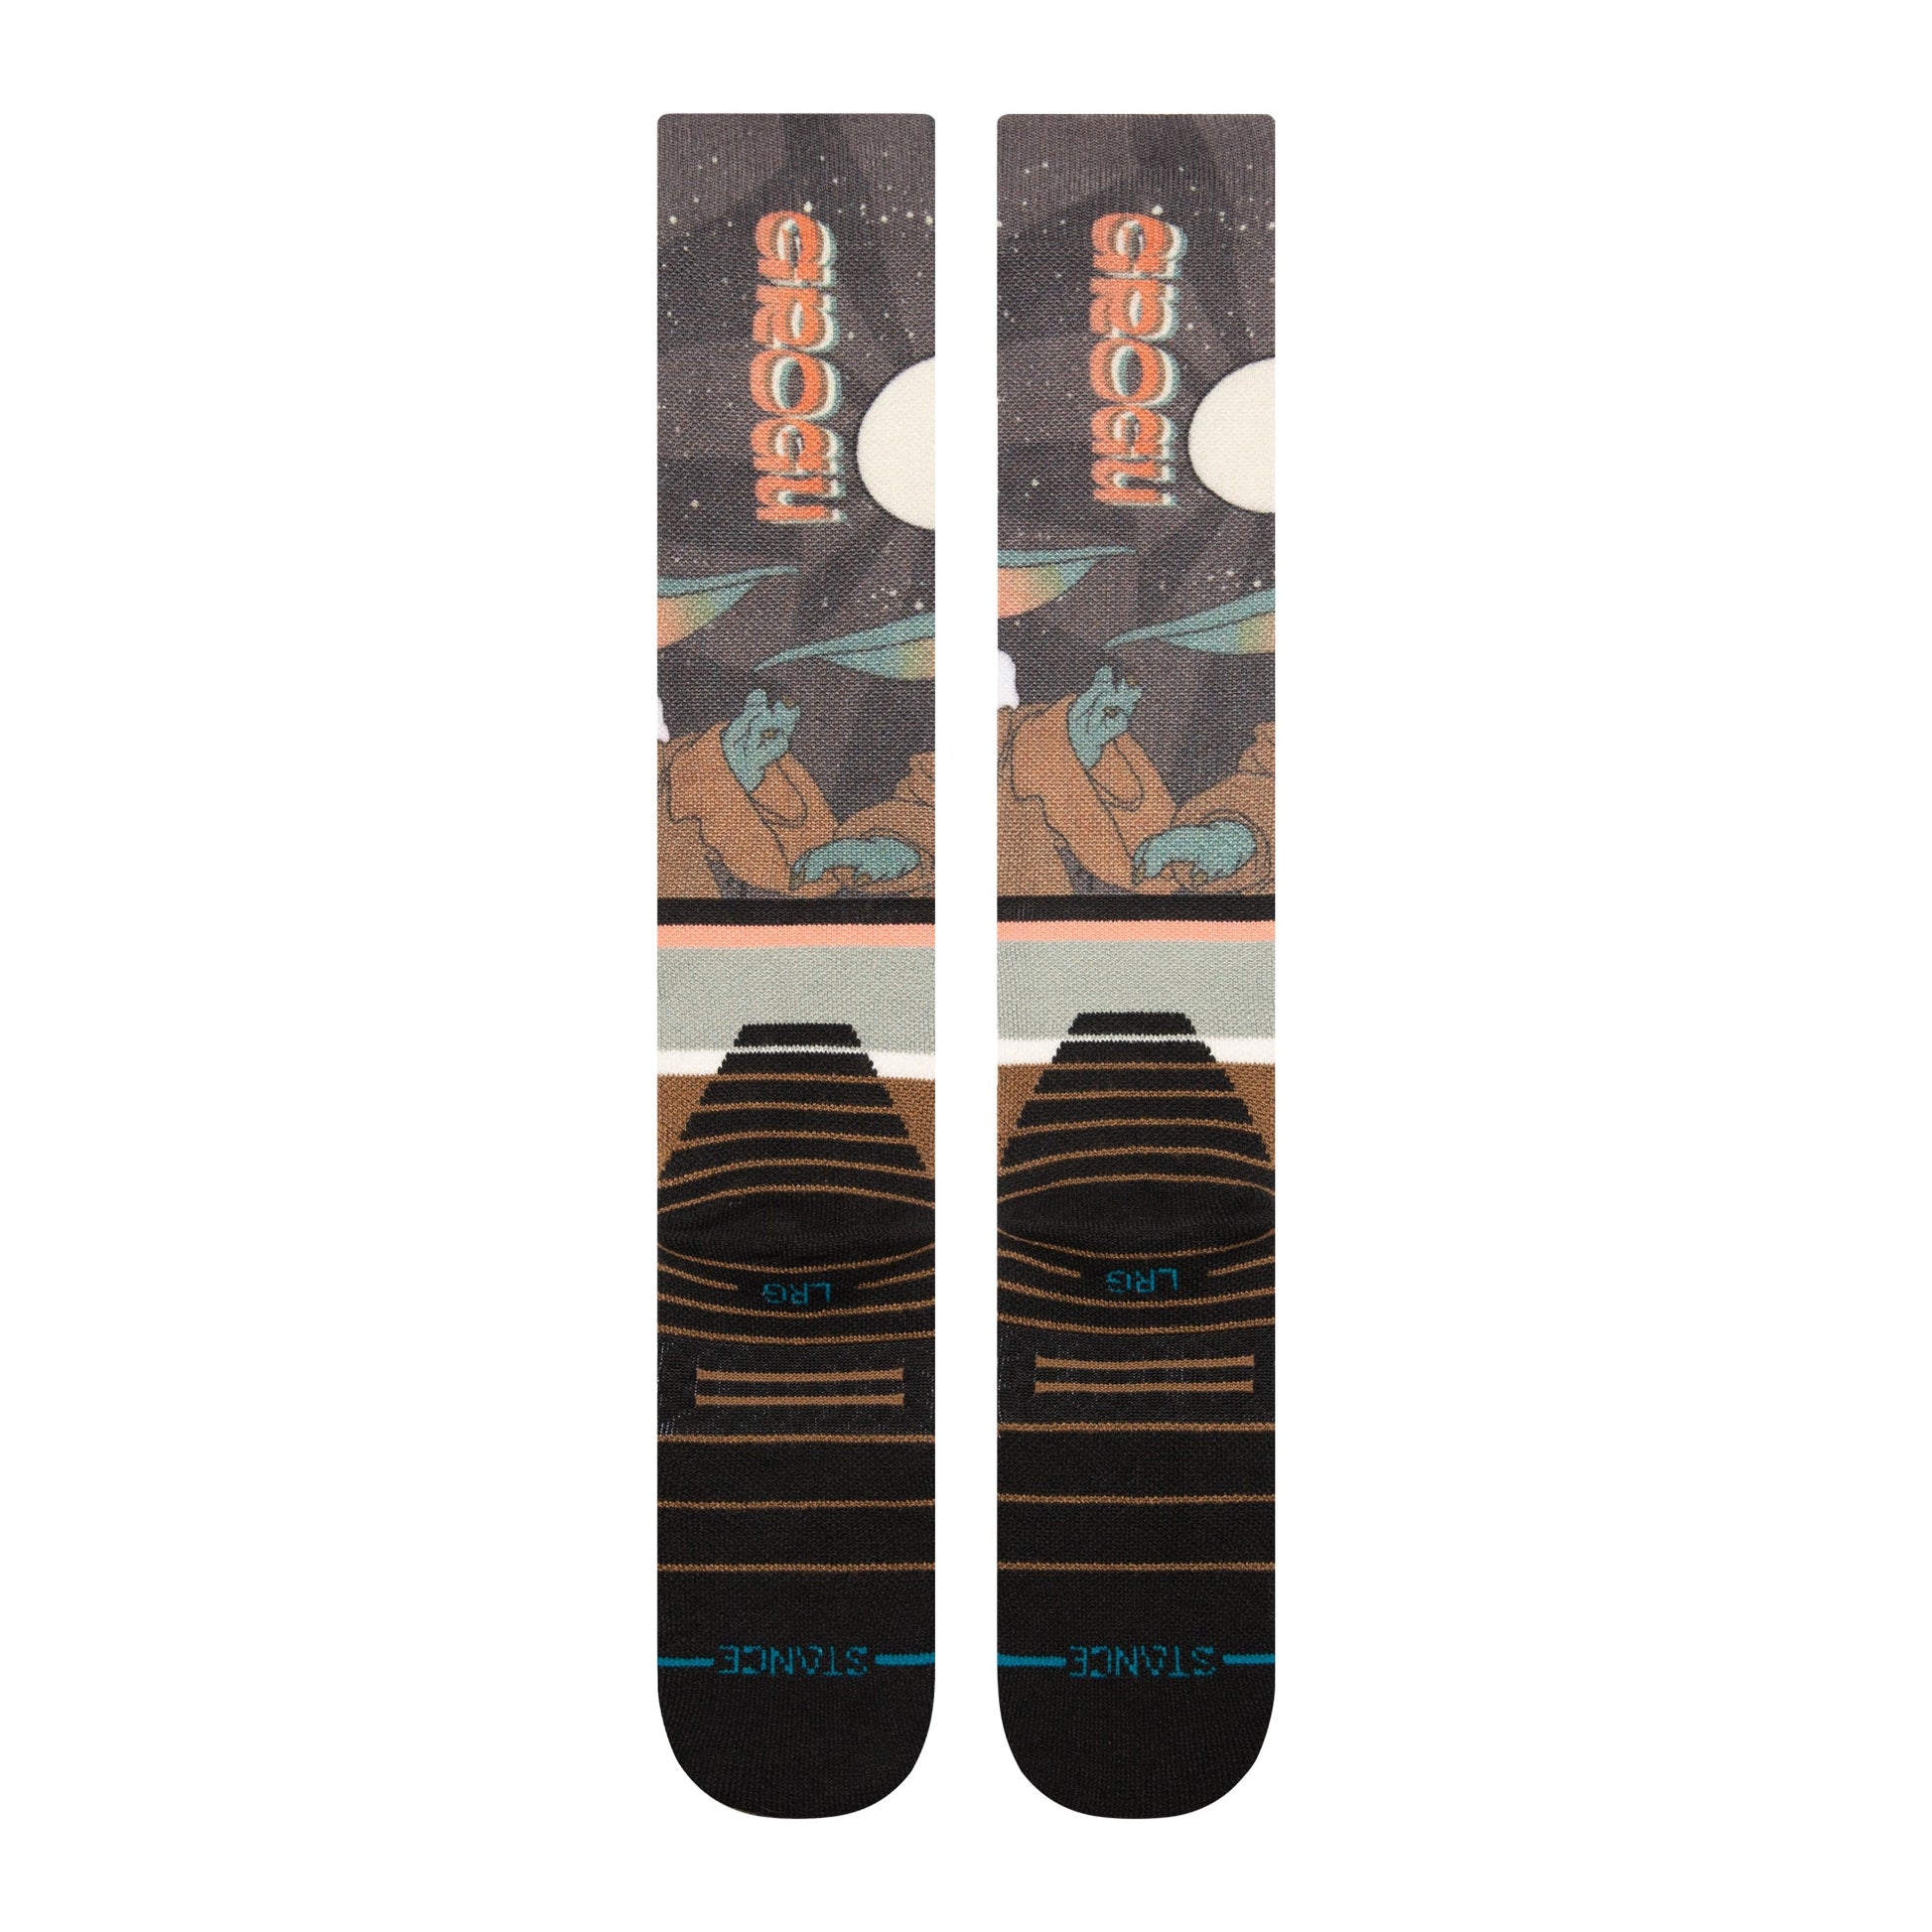 Stance Stsw Over The Calf Sock Blue